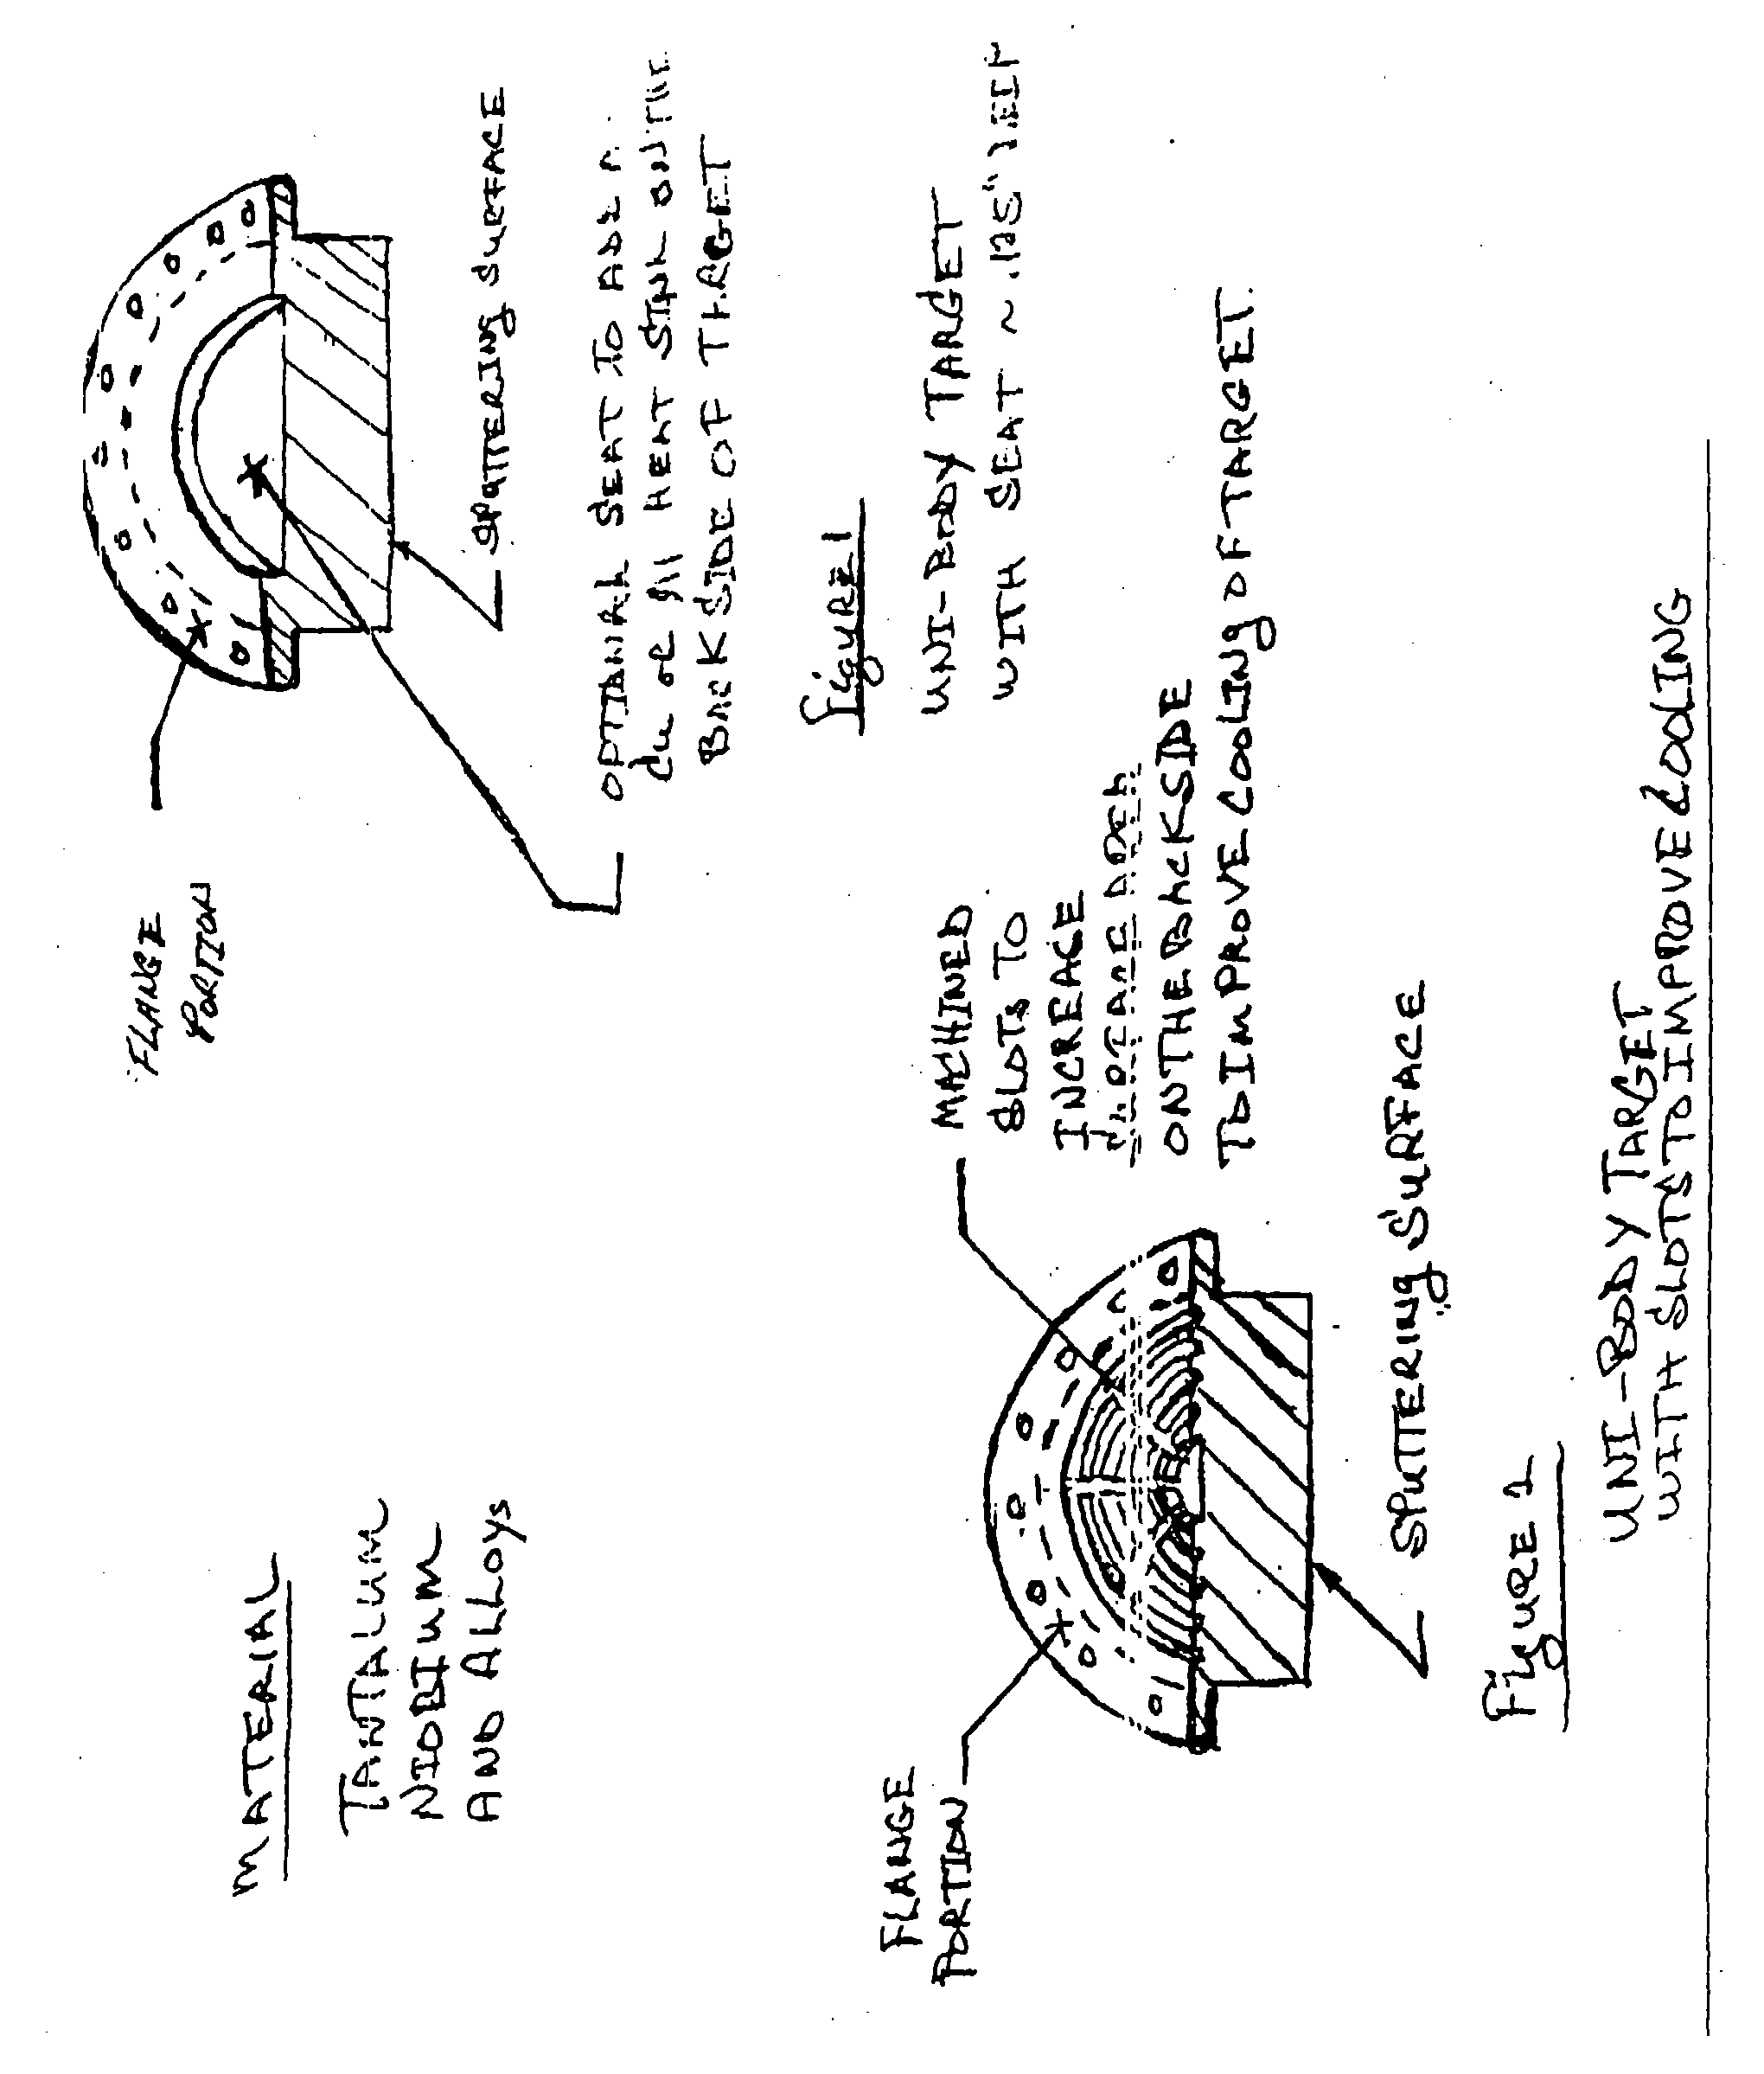 Monolithic sputtering target assembly